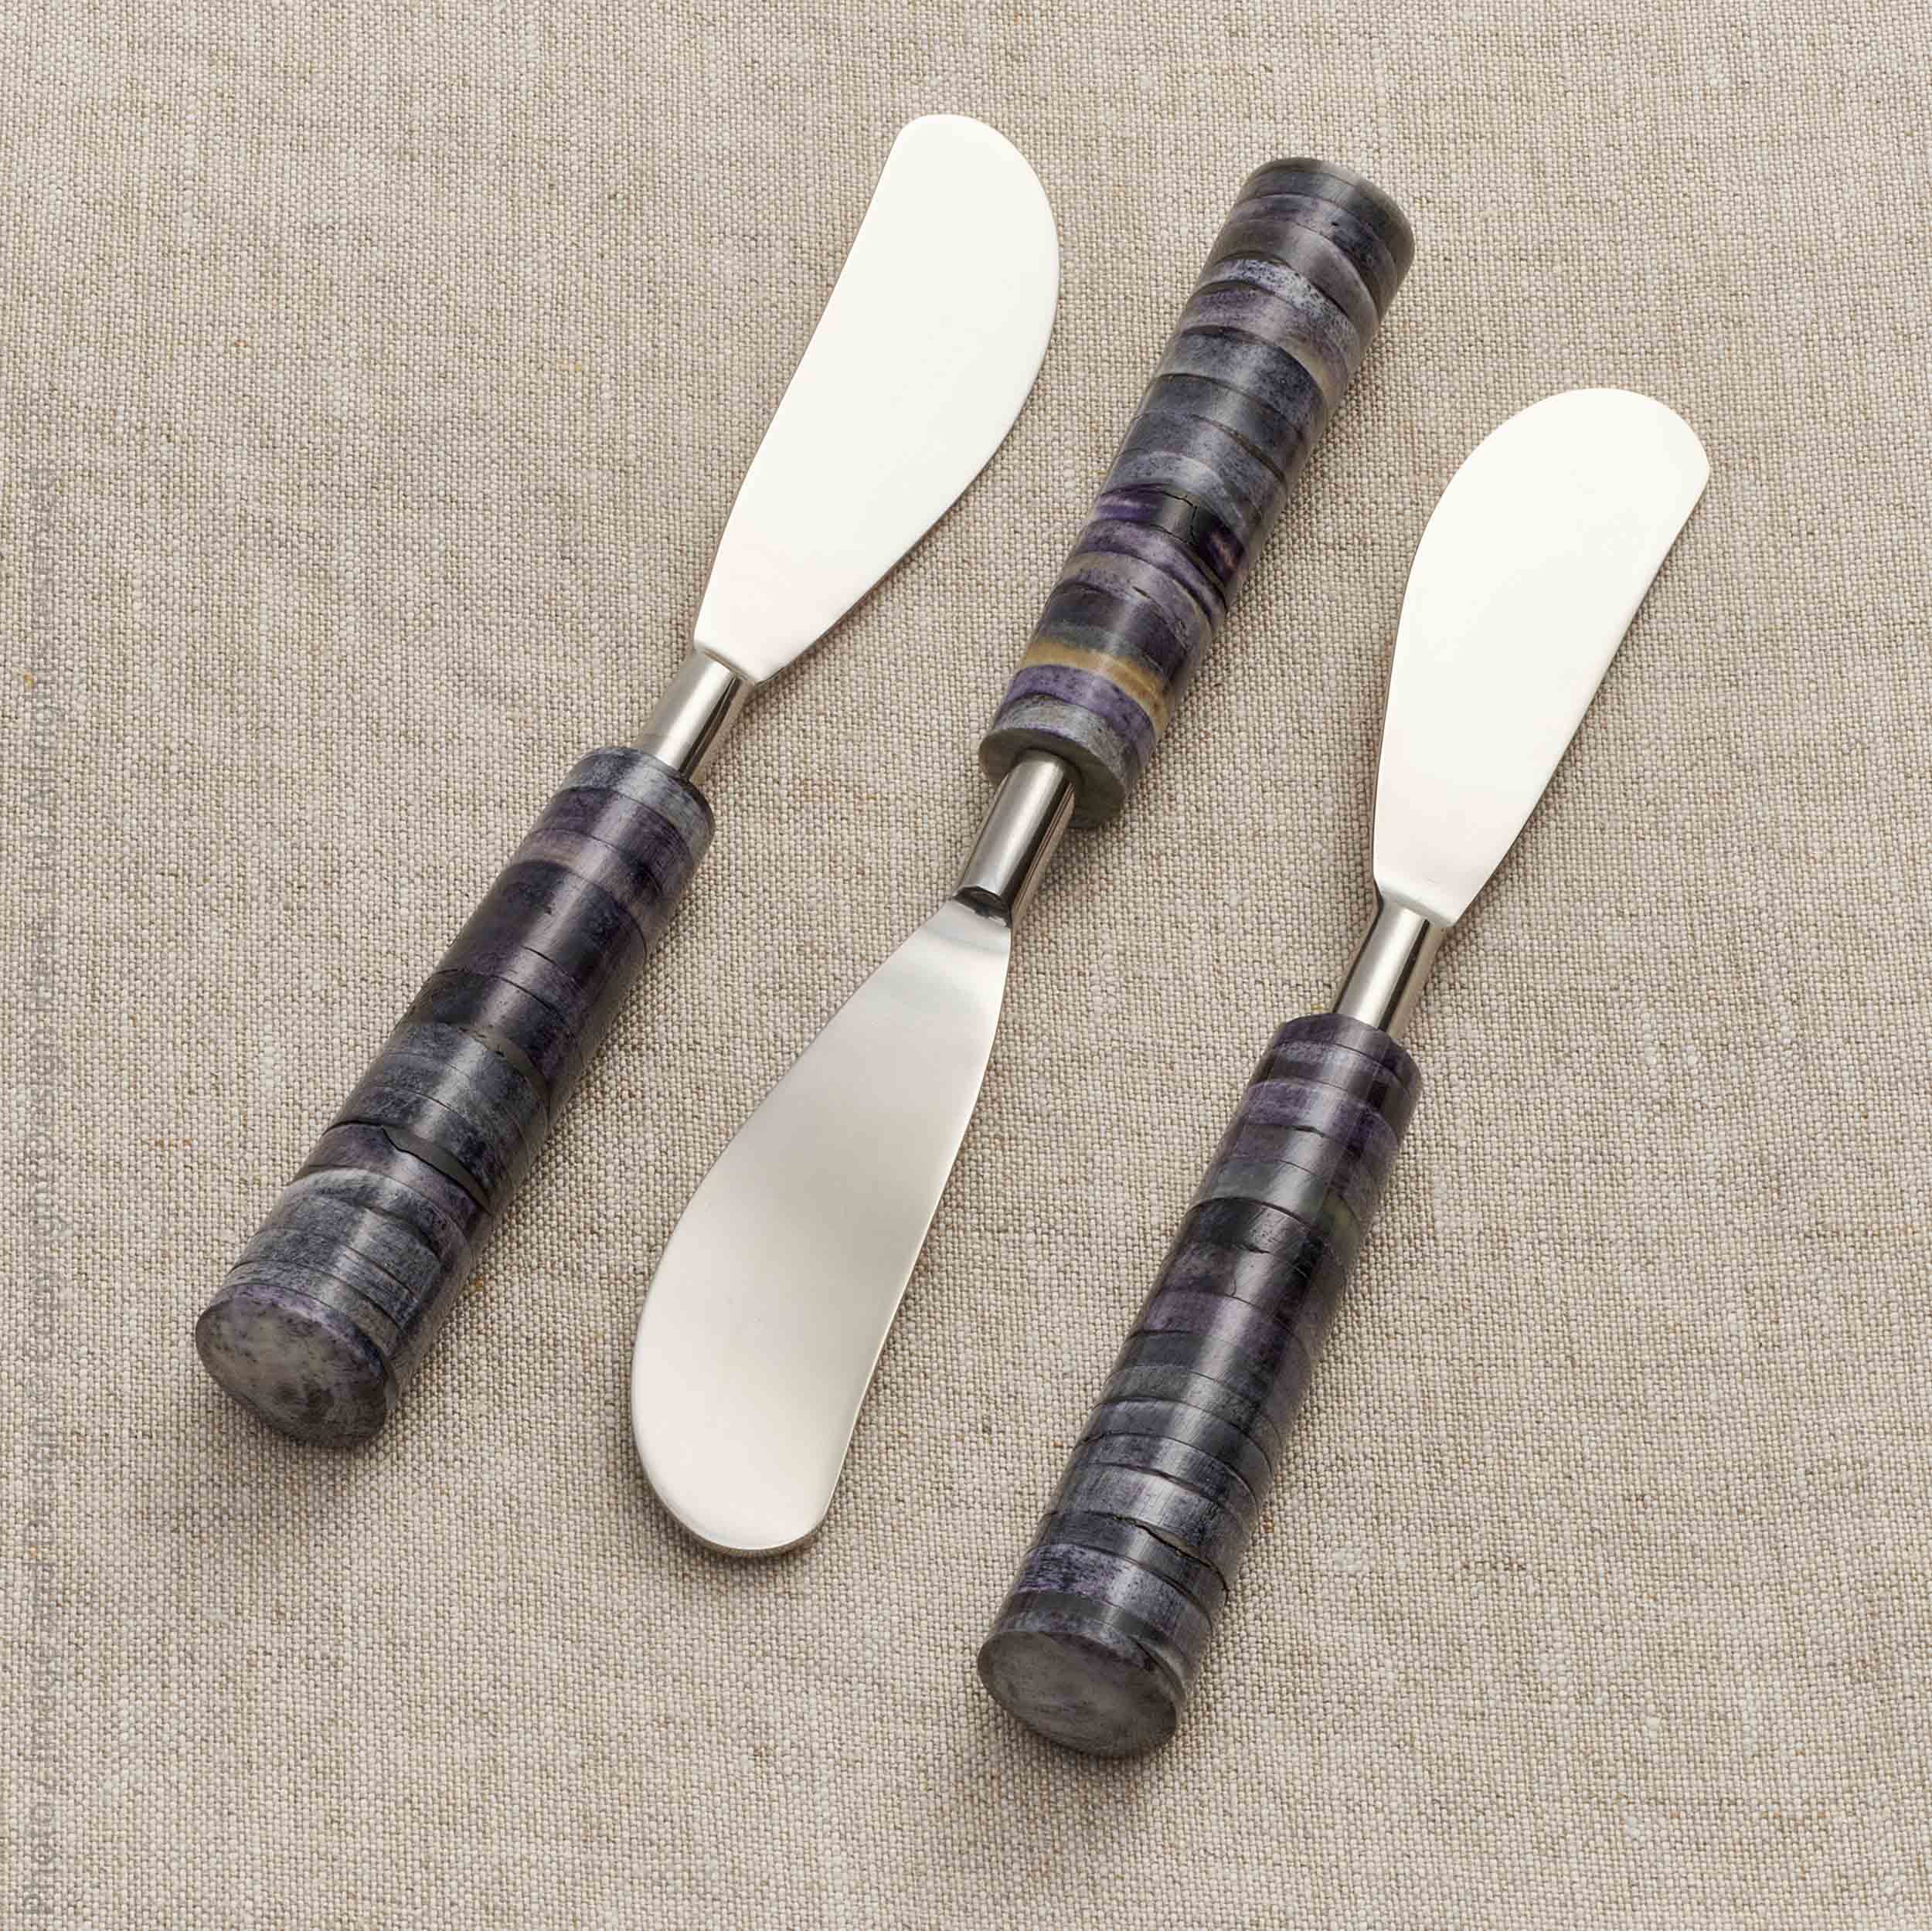 Fiori™ Handmade Stainless Steel and Bone Spreaders (set of 3) - (colors: Multi) | Premium Utensils from the Fiori™ collection | made with Stainless Steel and Bone for long lasting use